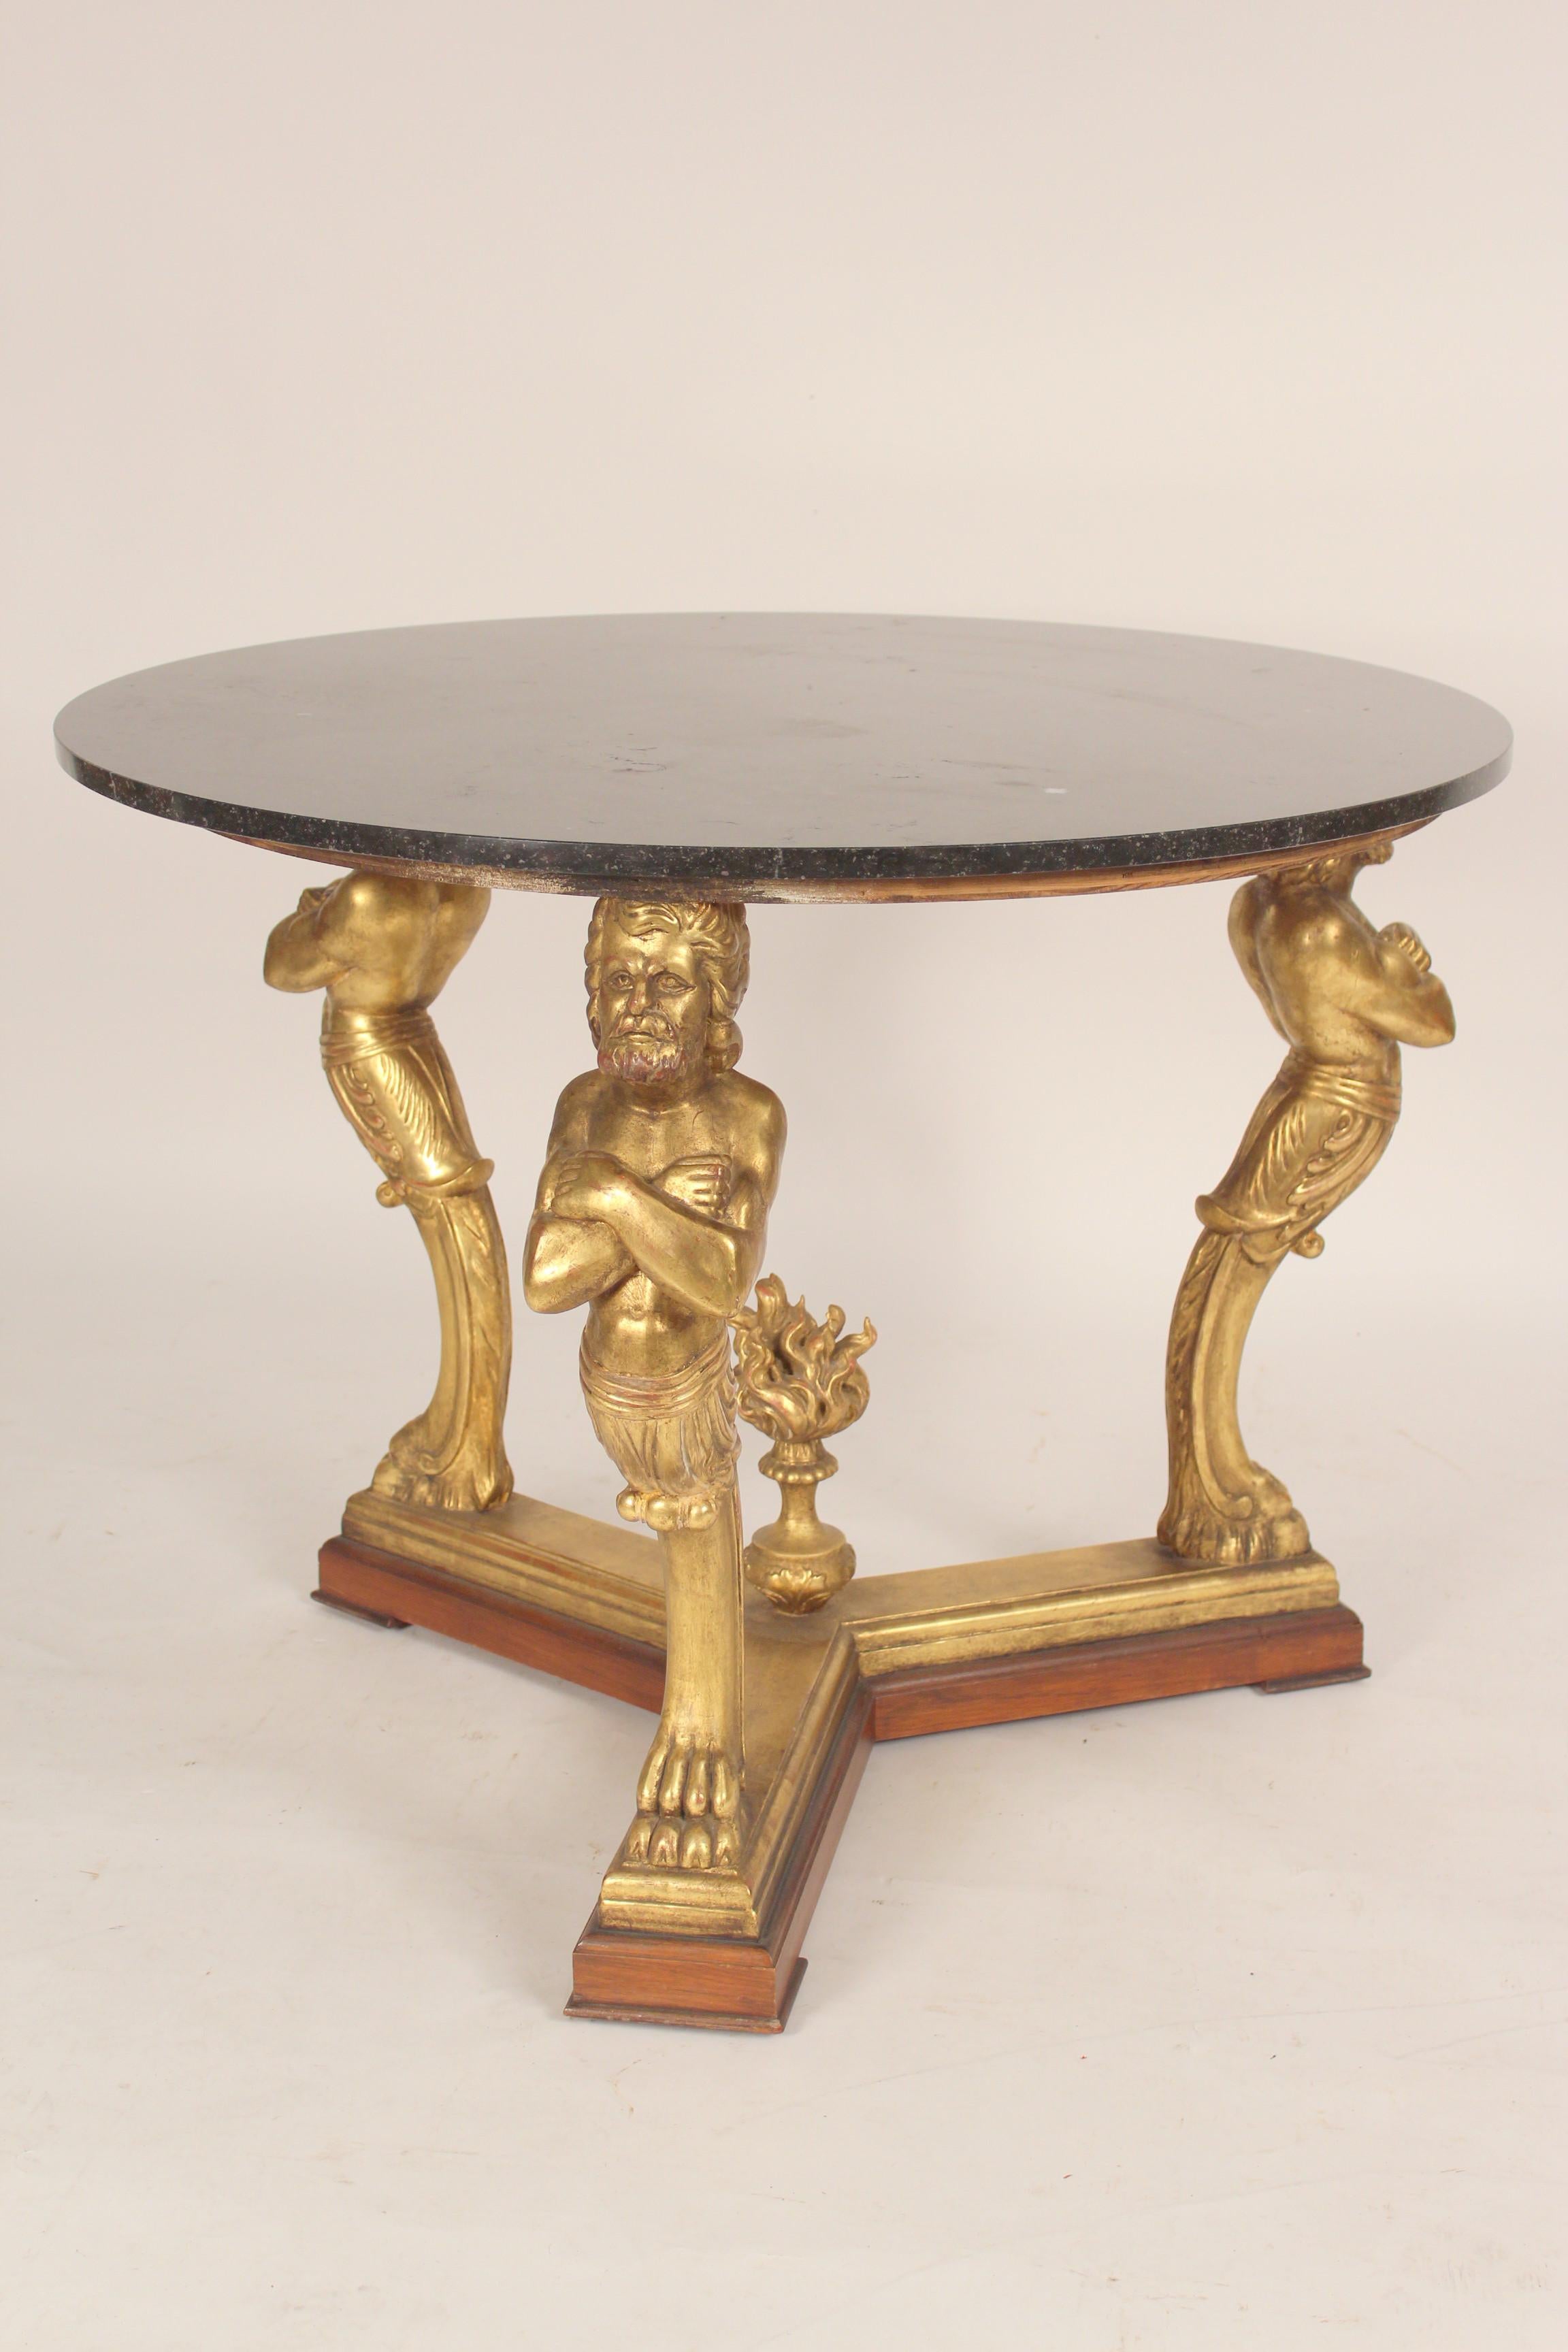 Neoclassical Neo Classical Style Gilt Decorated Center Table